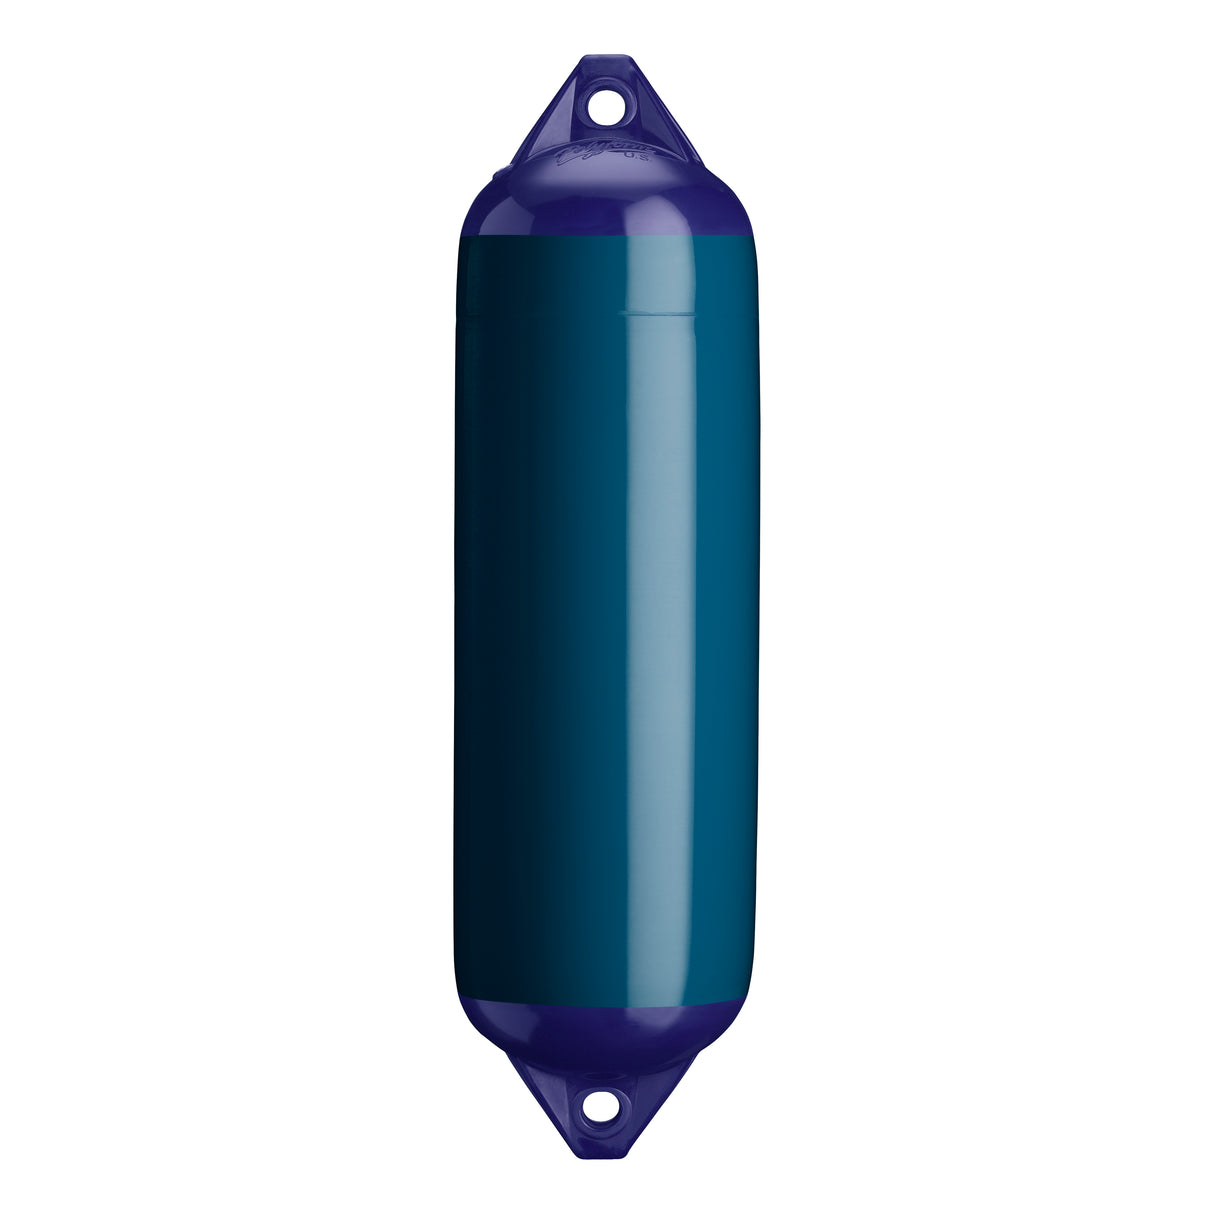 Catalina Blue boat fender with Navy-Top, Polyform F-3 